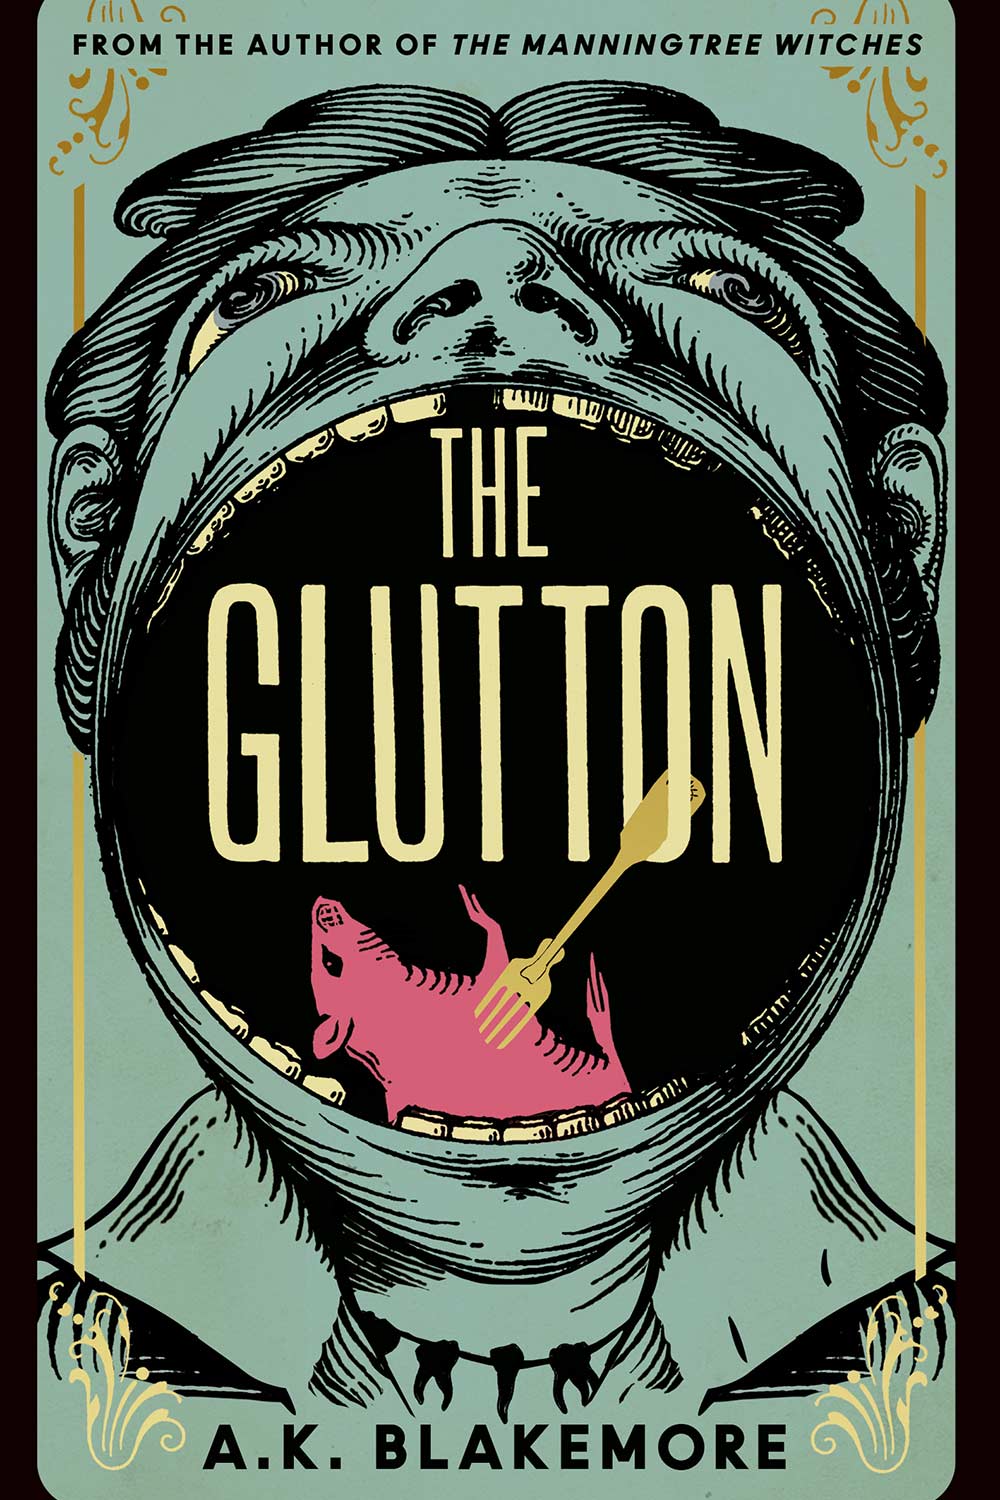 The front cover of The Glutton by AK Blakemore